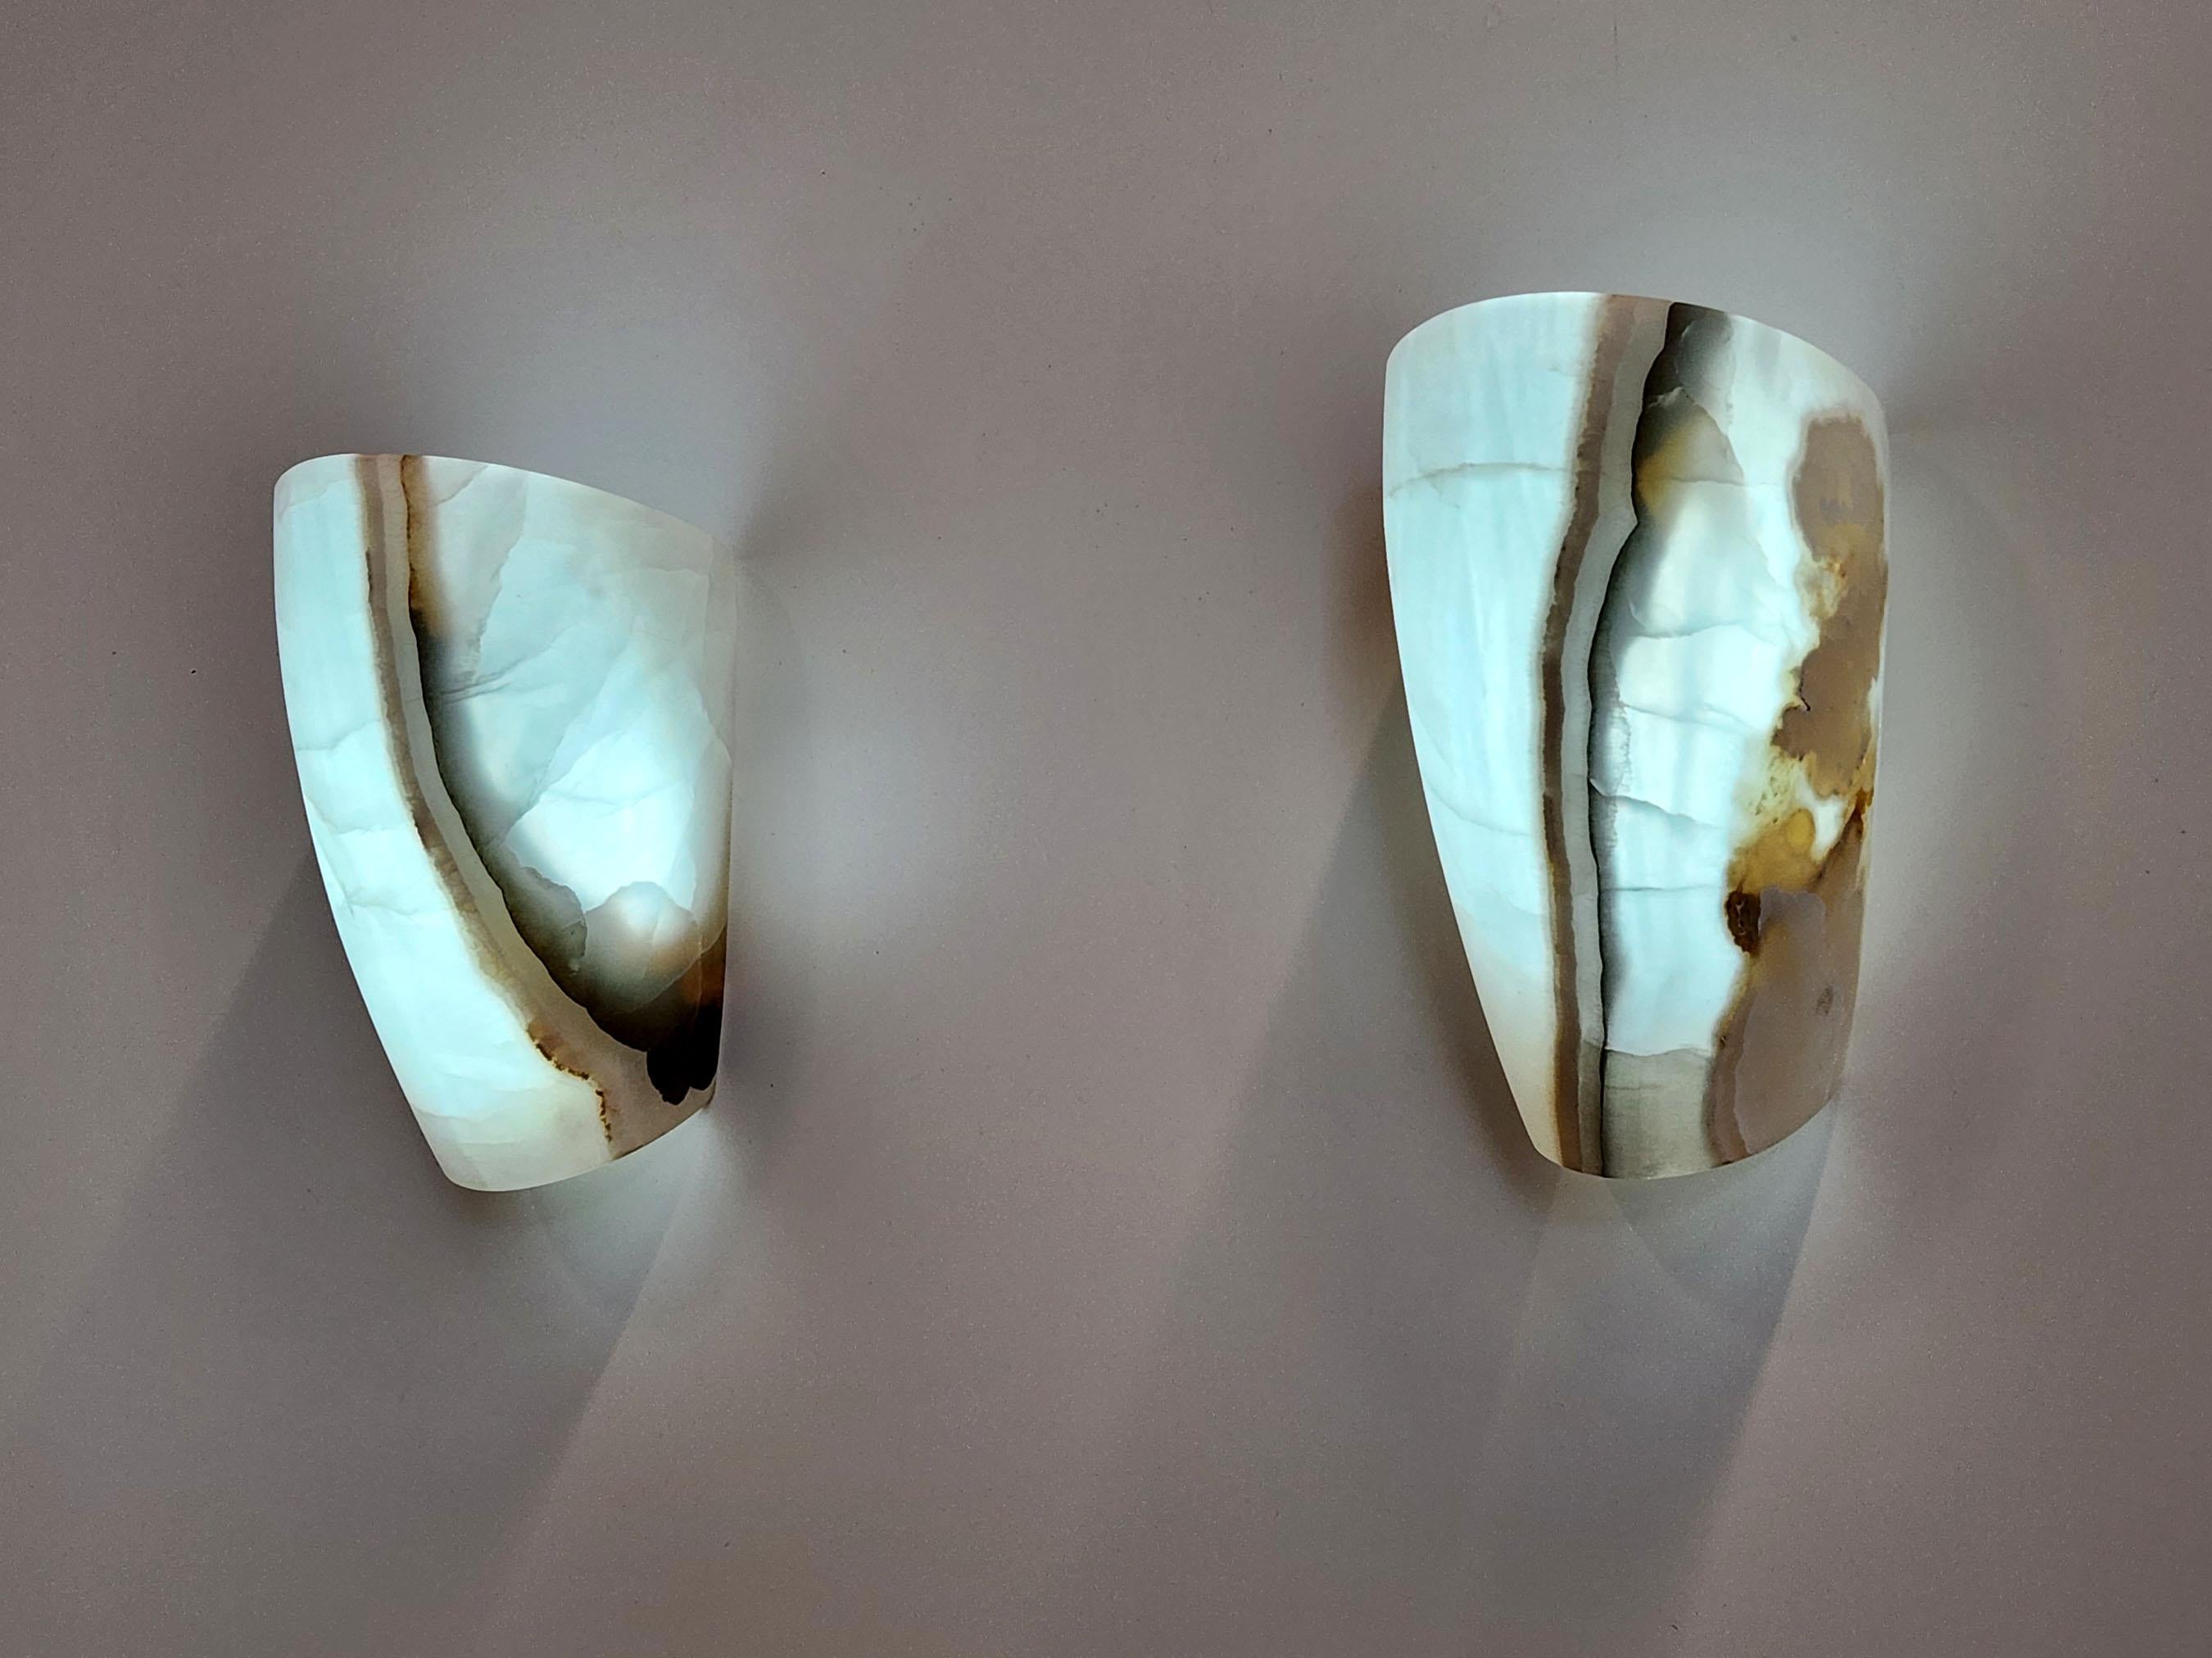 This is an all Onyx ambient sconce, with a high and surprising contrast in luminosity. When lit, the light accentuates the differences in the translucency of the stone. It ranges from the highly translucent white and light brown. 

Although there